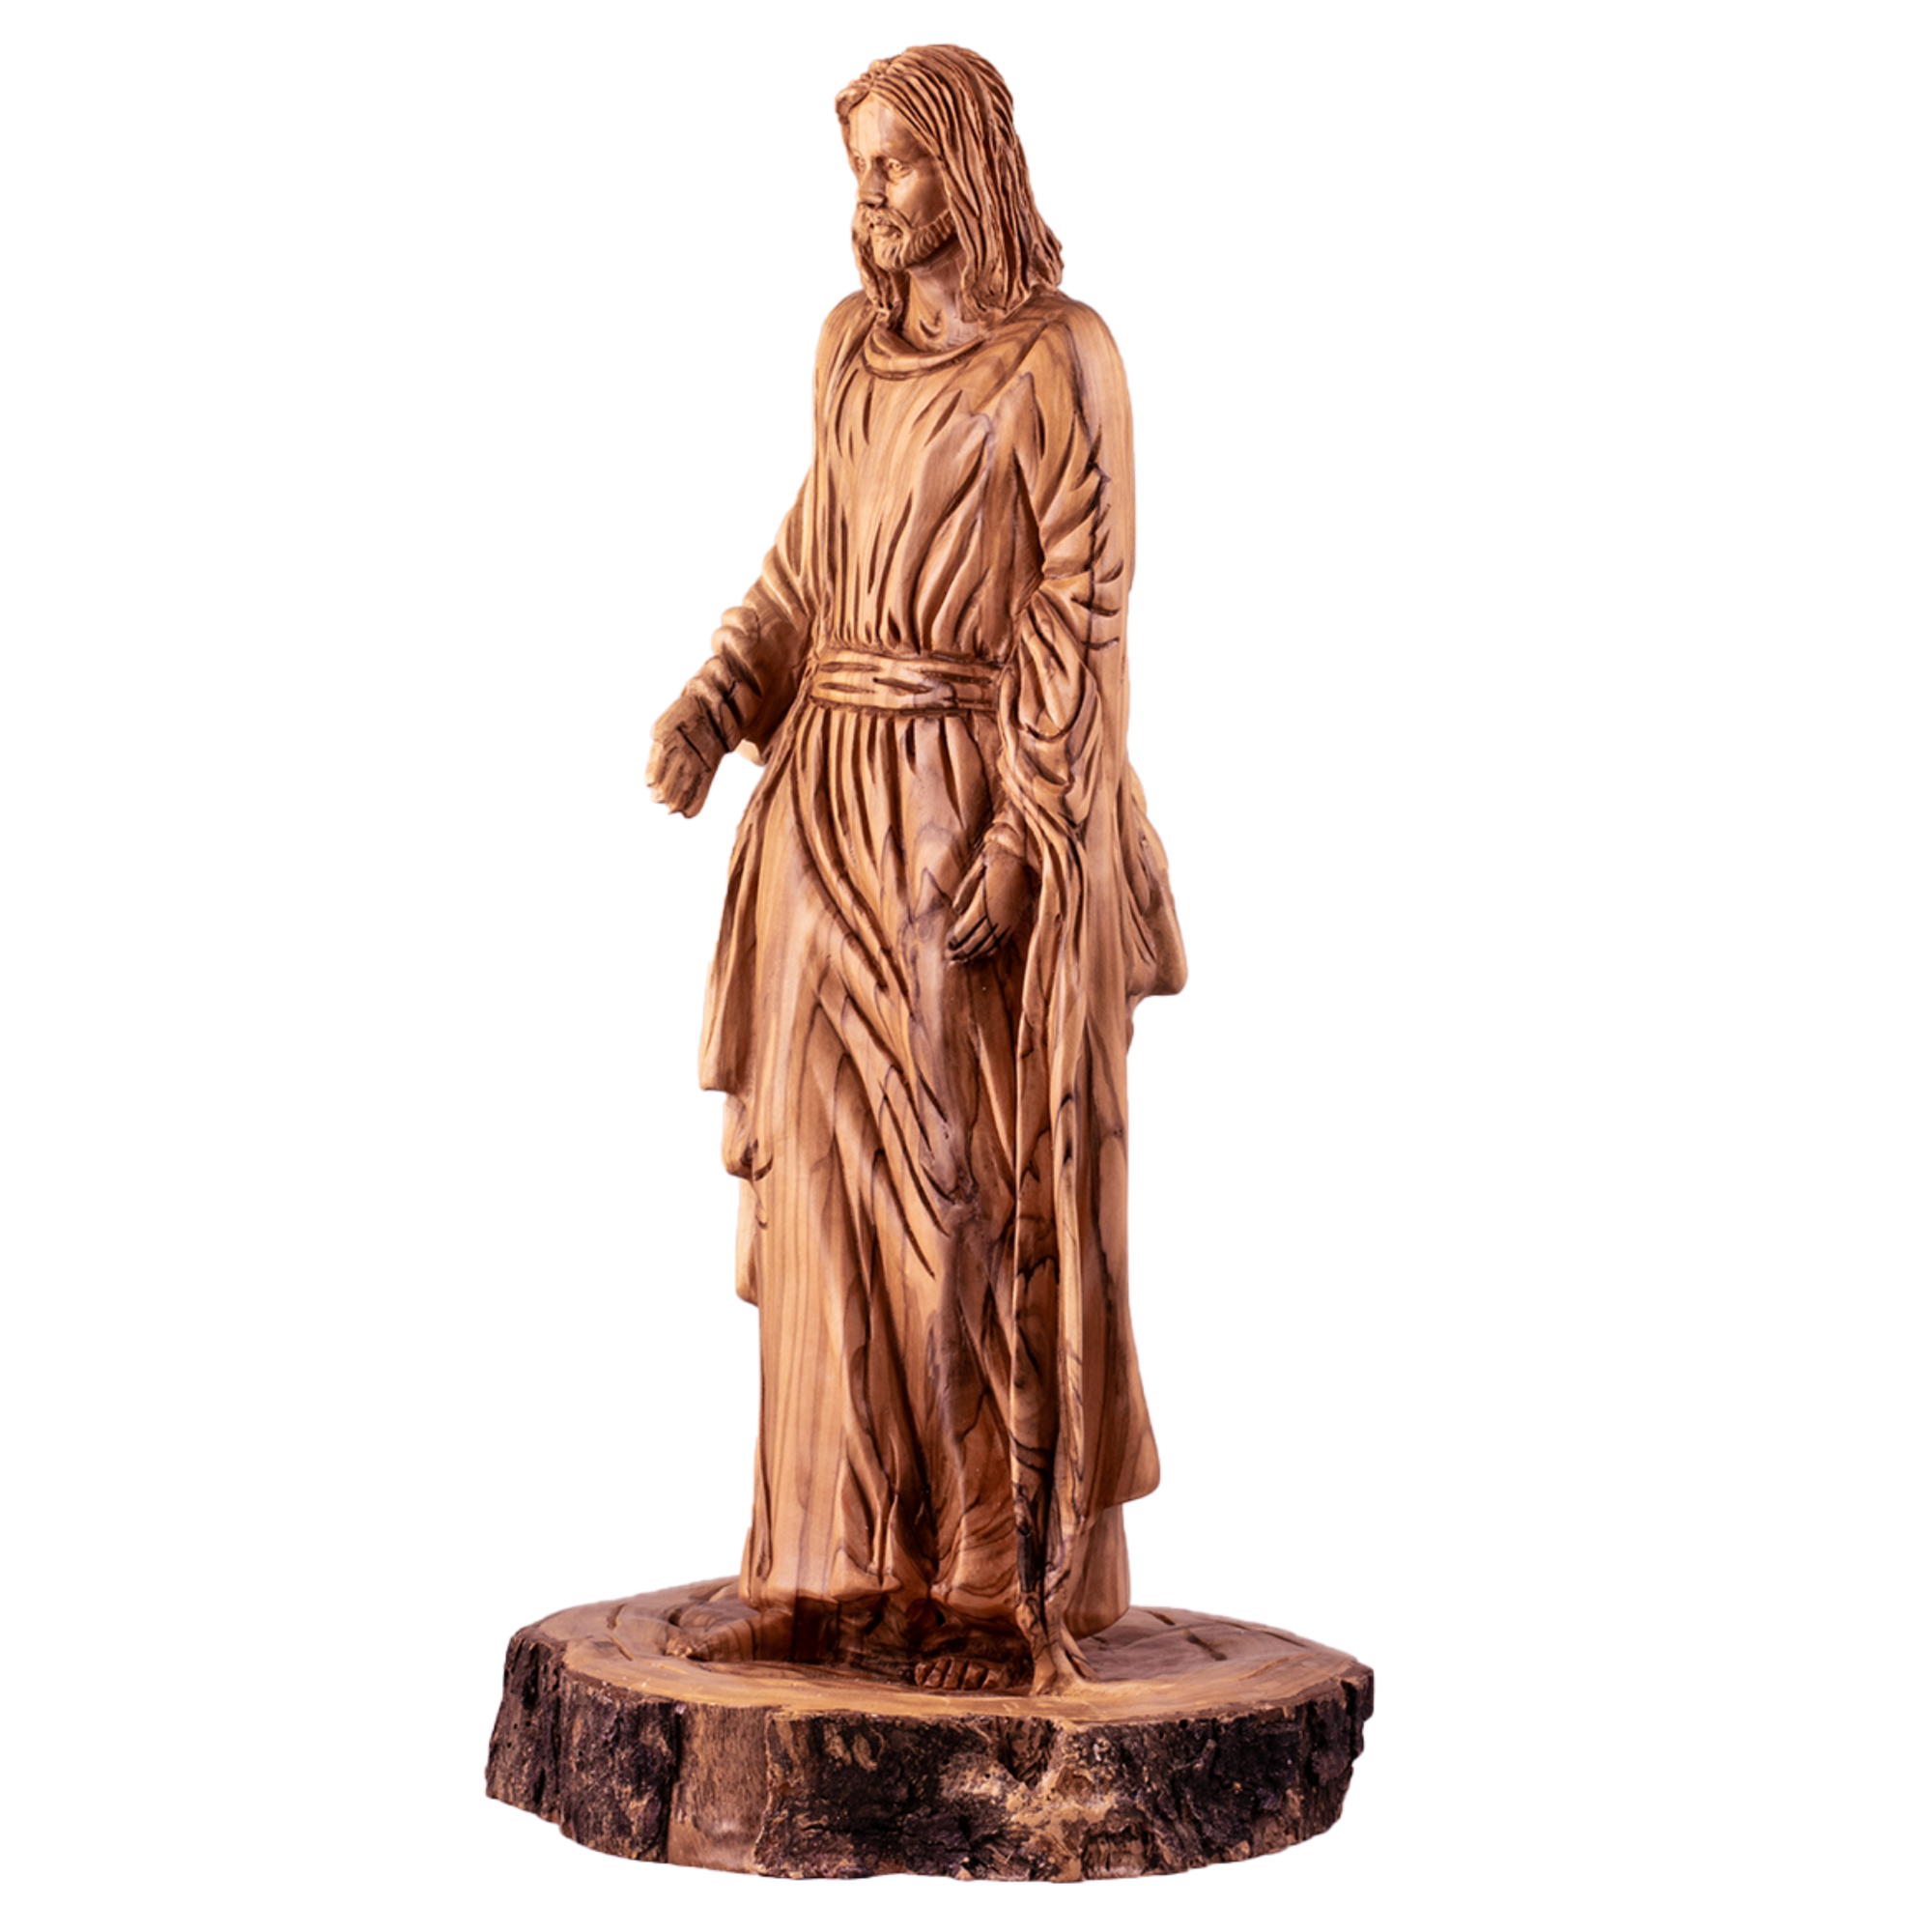 Jesus blessing the people. one piece of wood, Size: 6.8" x 6.8" x 14"